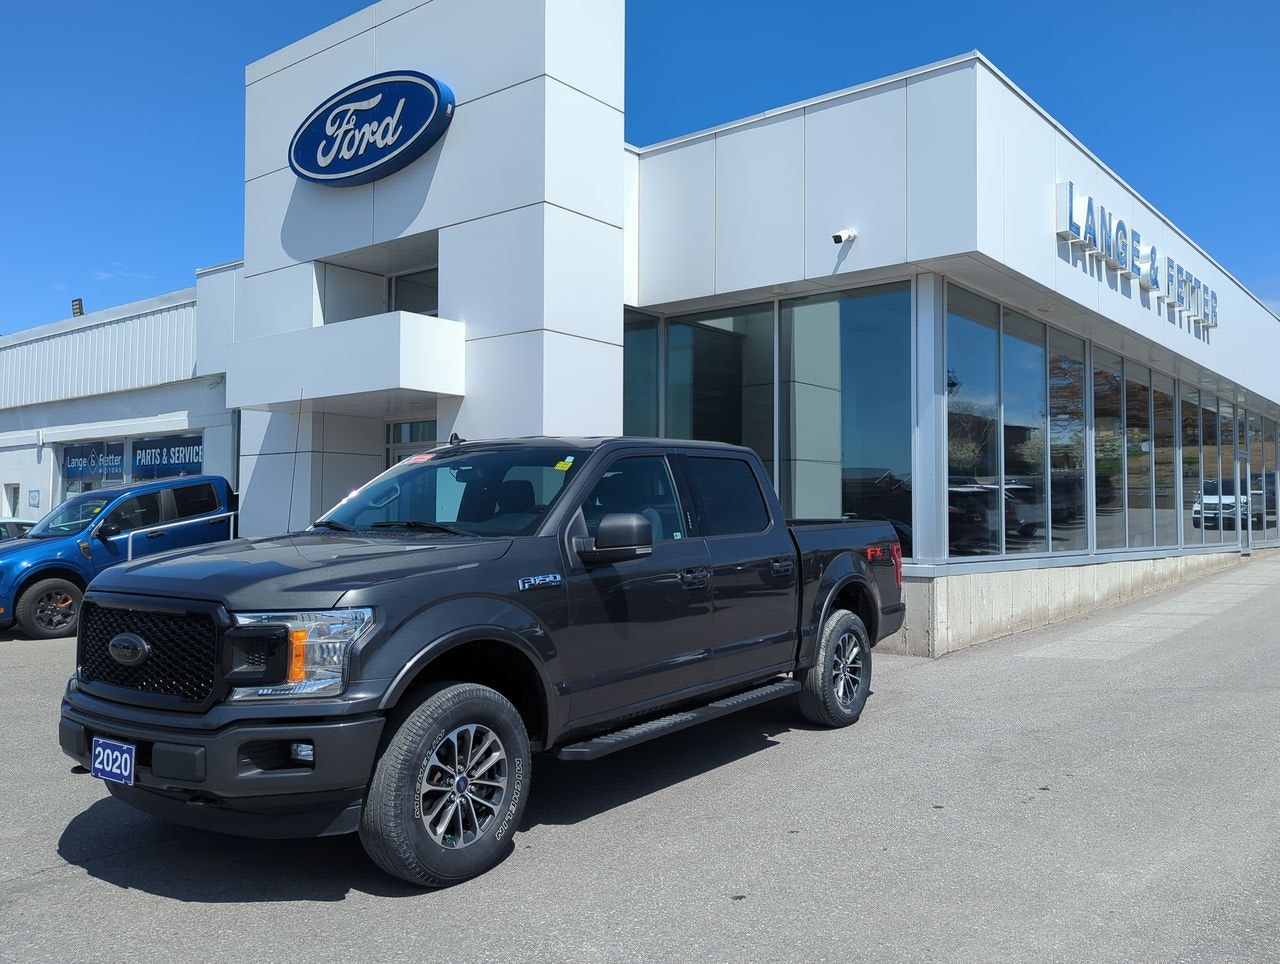 2020 Ford F-150 - 21420A Full Image 1